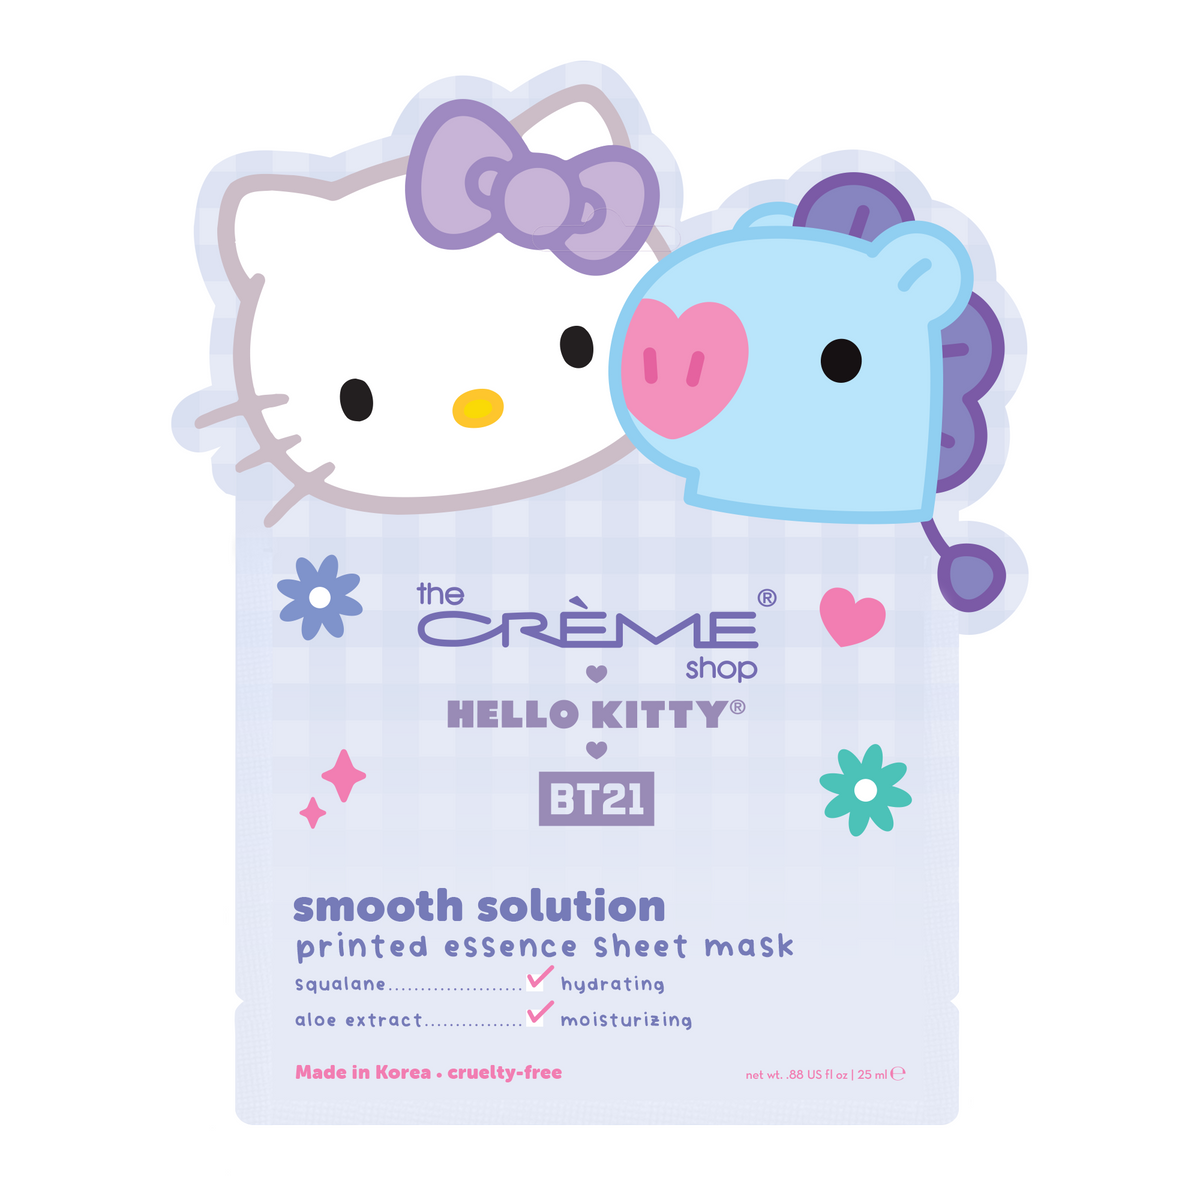 Hello Kitty &amp; BT21 Smooth Solution Printed Essence Sheet Mask Beauty The Crème Shop   